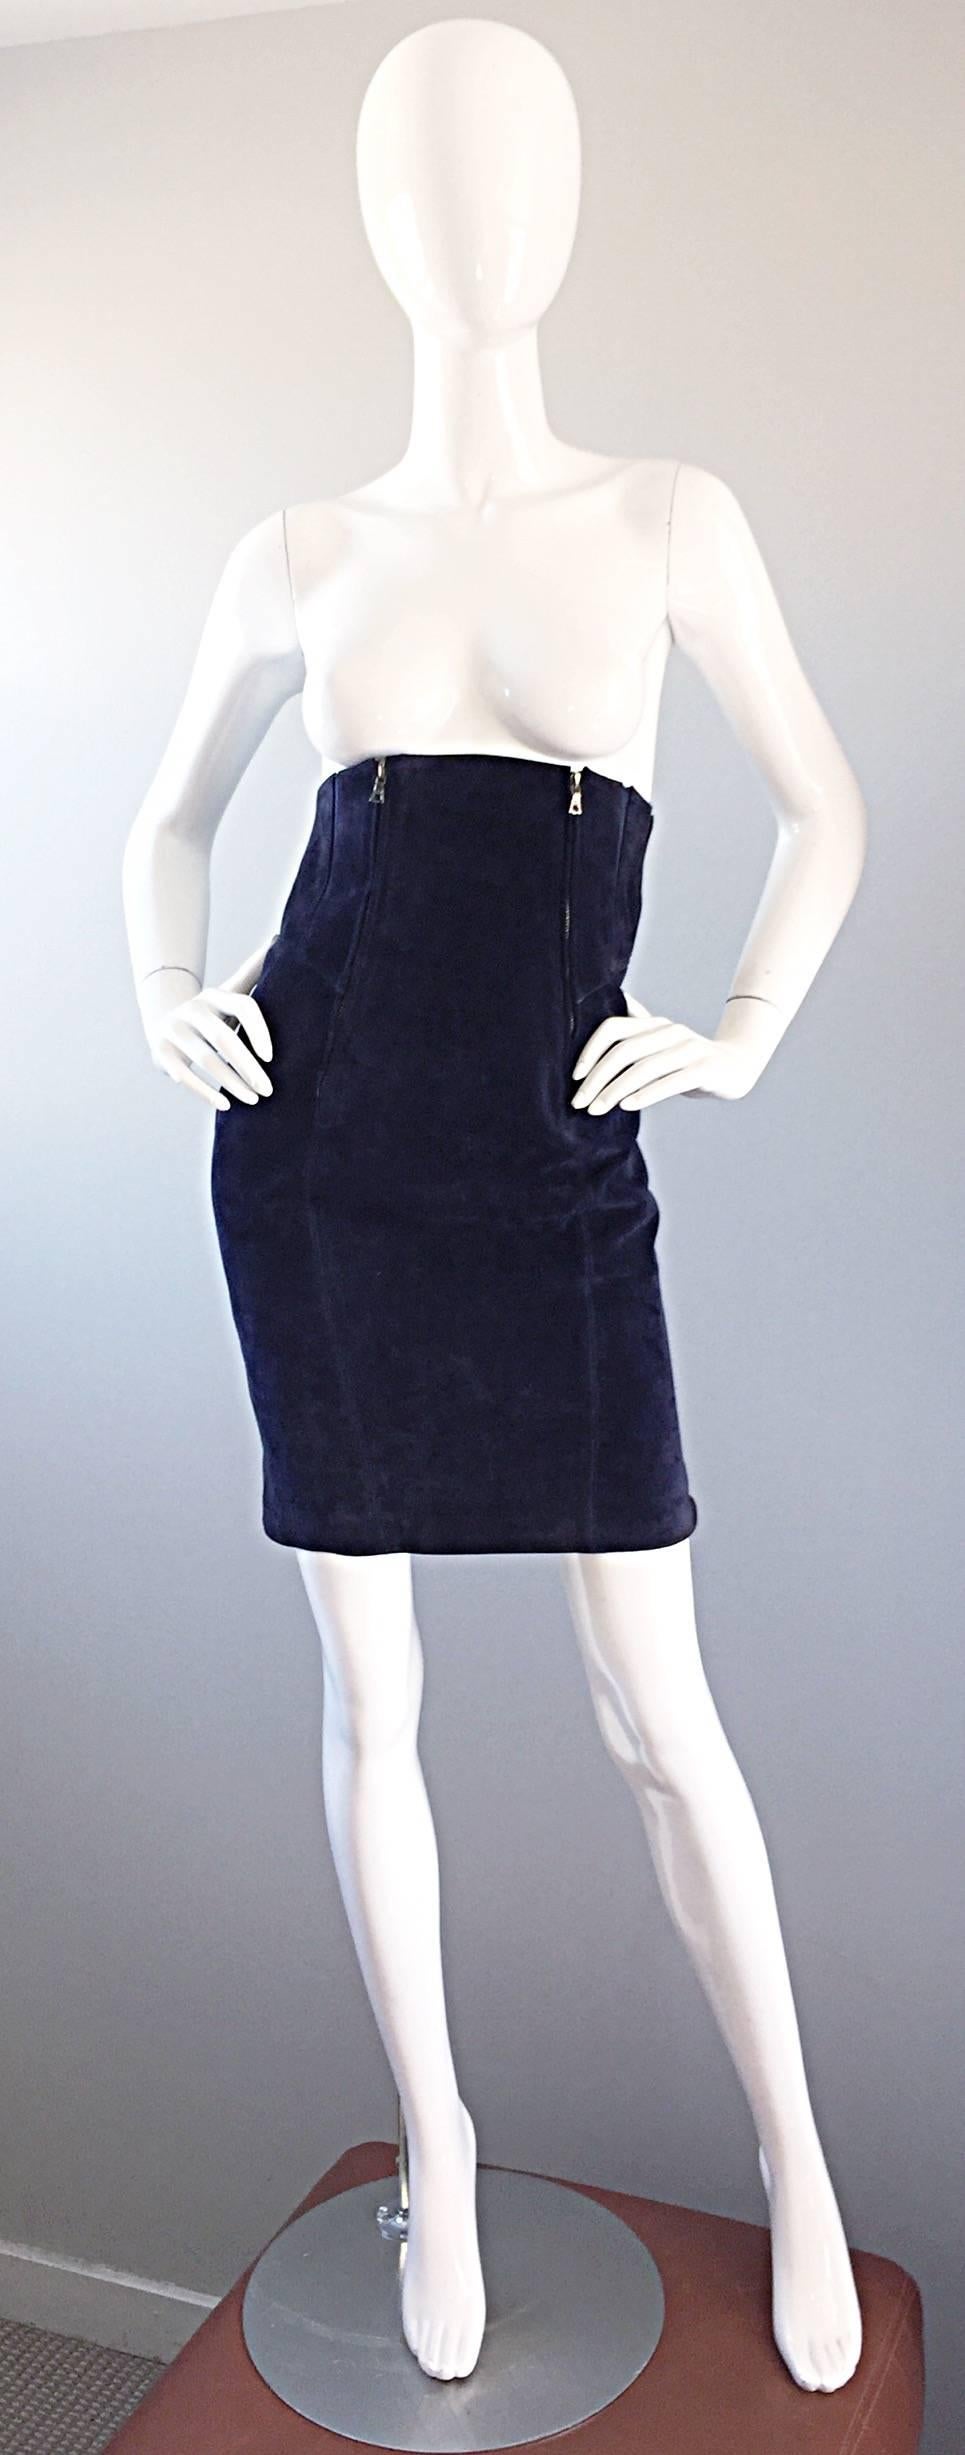 Important rare vintage CLAUDE MONTANA Navy blue suede leather ultra high waisted bodycon skirt! Rich navy blue color, with two full silver metal zippers up each side of the waist. Features two elastic panels at each side of the waist, too. Looks